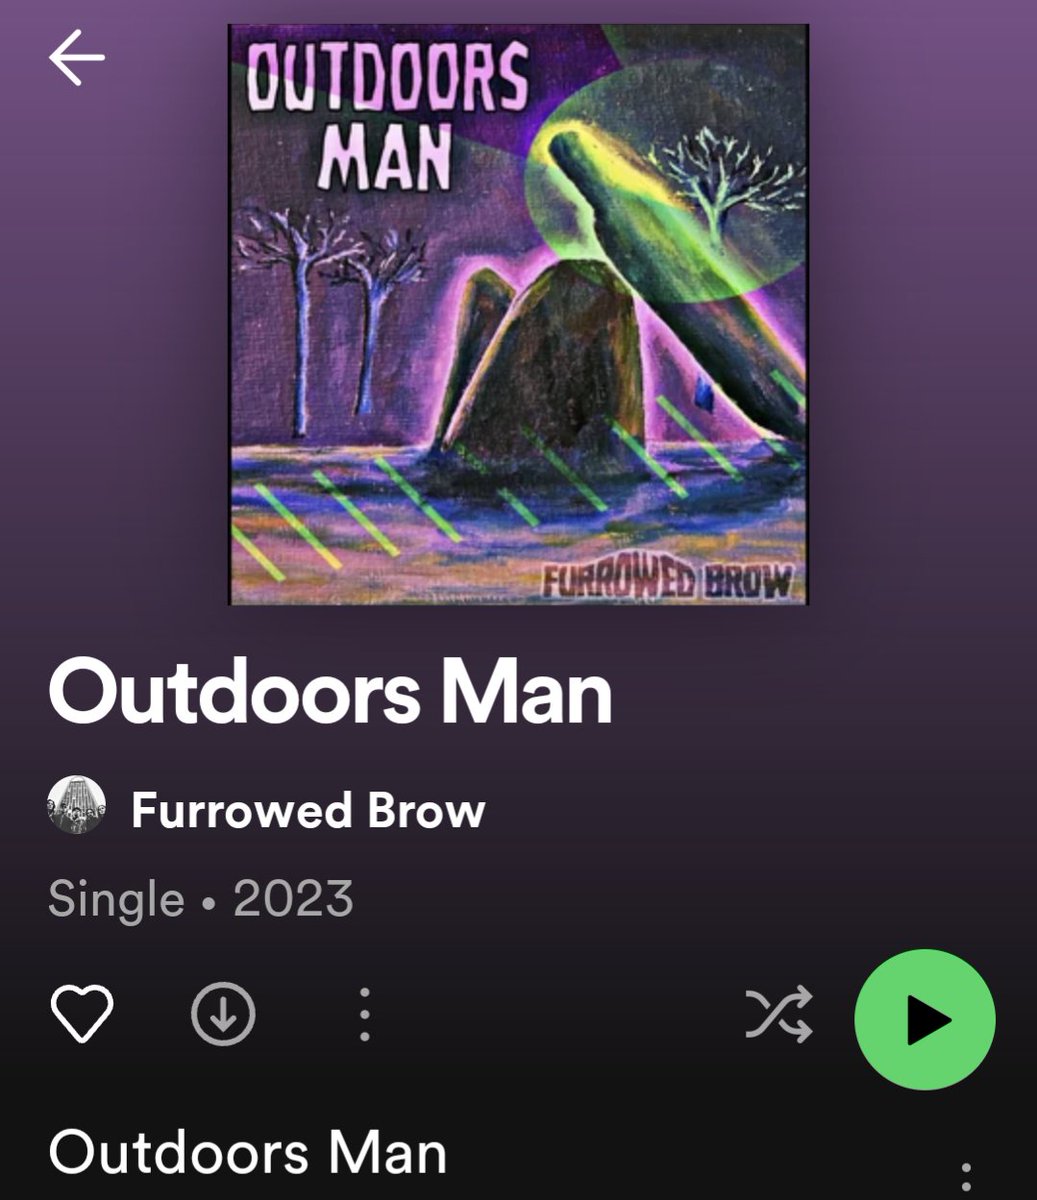 ⭐NEW SONG REVIEW⭐ 'Outdoors Man' is the new tune from @furrowedbrowMCR classic 70s punk is alive and well a song oiled with the bands unique post punk vibe to me I hear elements of Deaf School with so many twists and turns this song keeps you guessing One of our faves of 2023